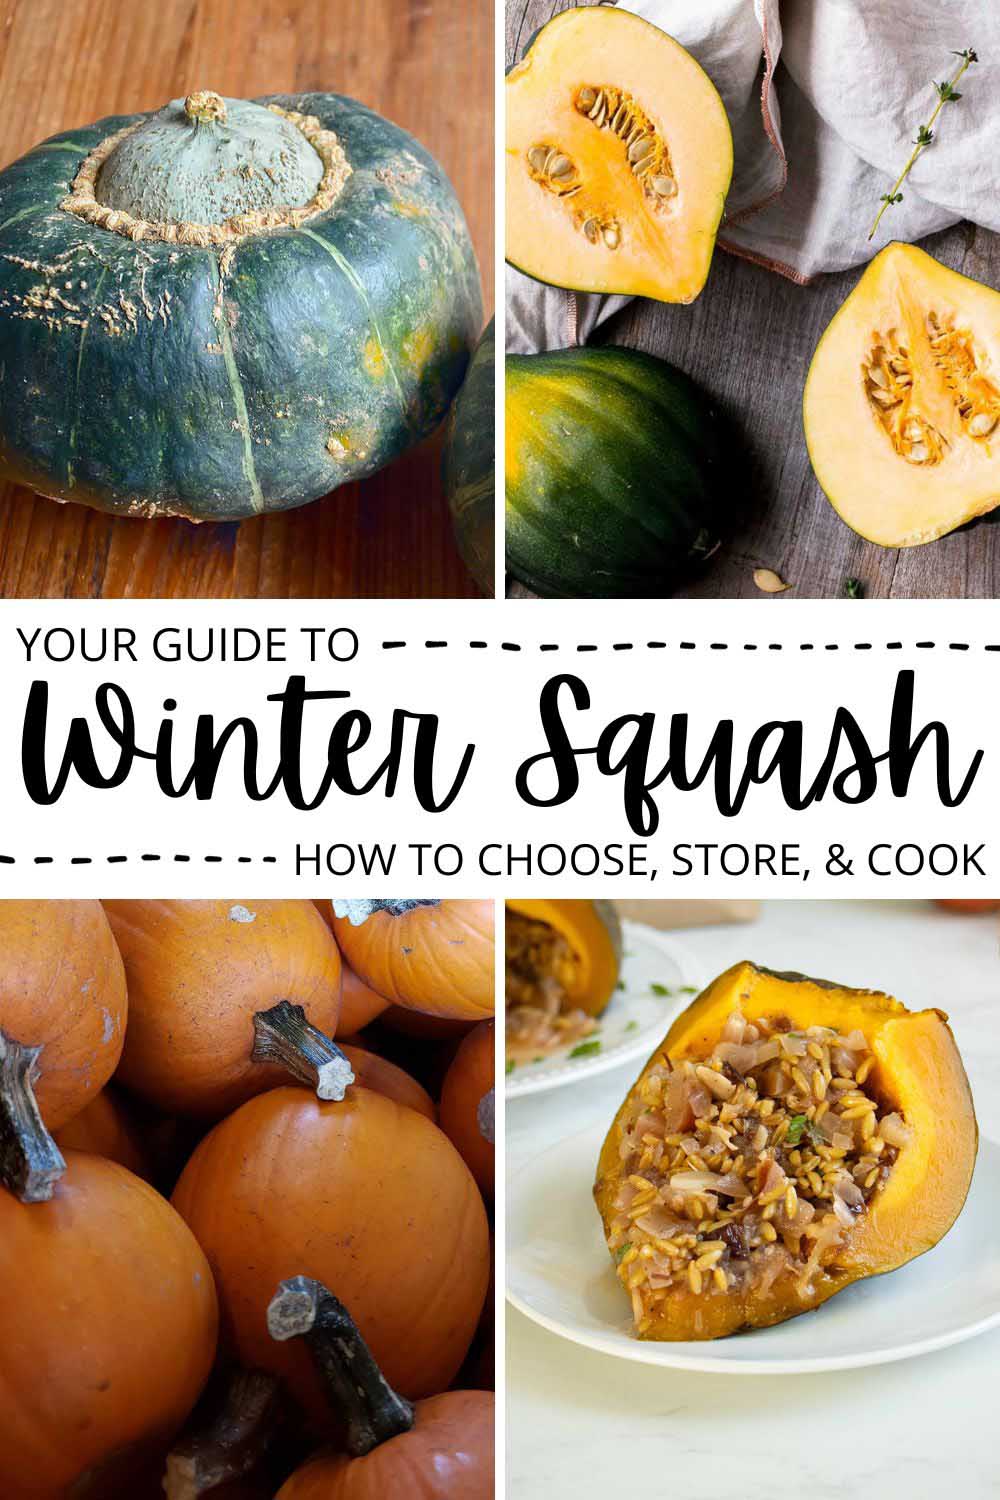 image collage of buttercup squash, acorn squash, pie pumpkins, and stuffed kabocha pumpkin. Text reads, "Your guide to winter squash. How to choose, store, and cook."